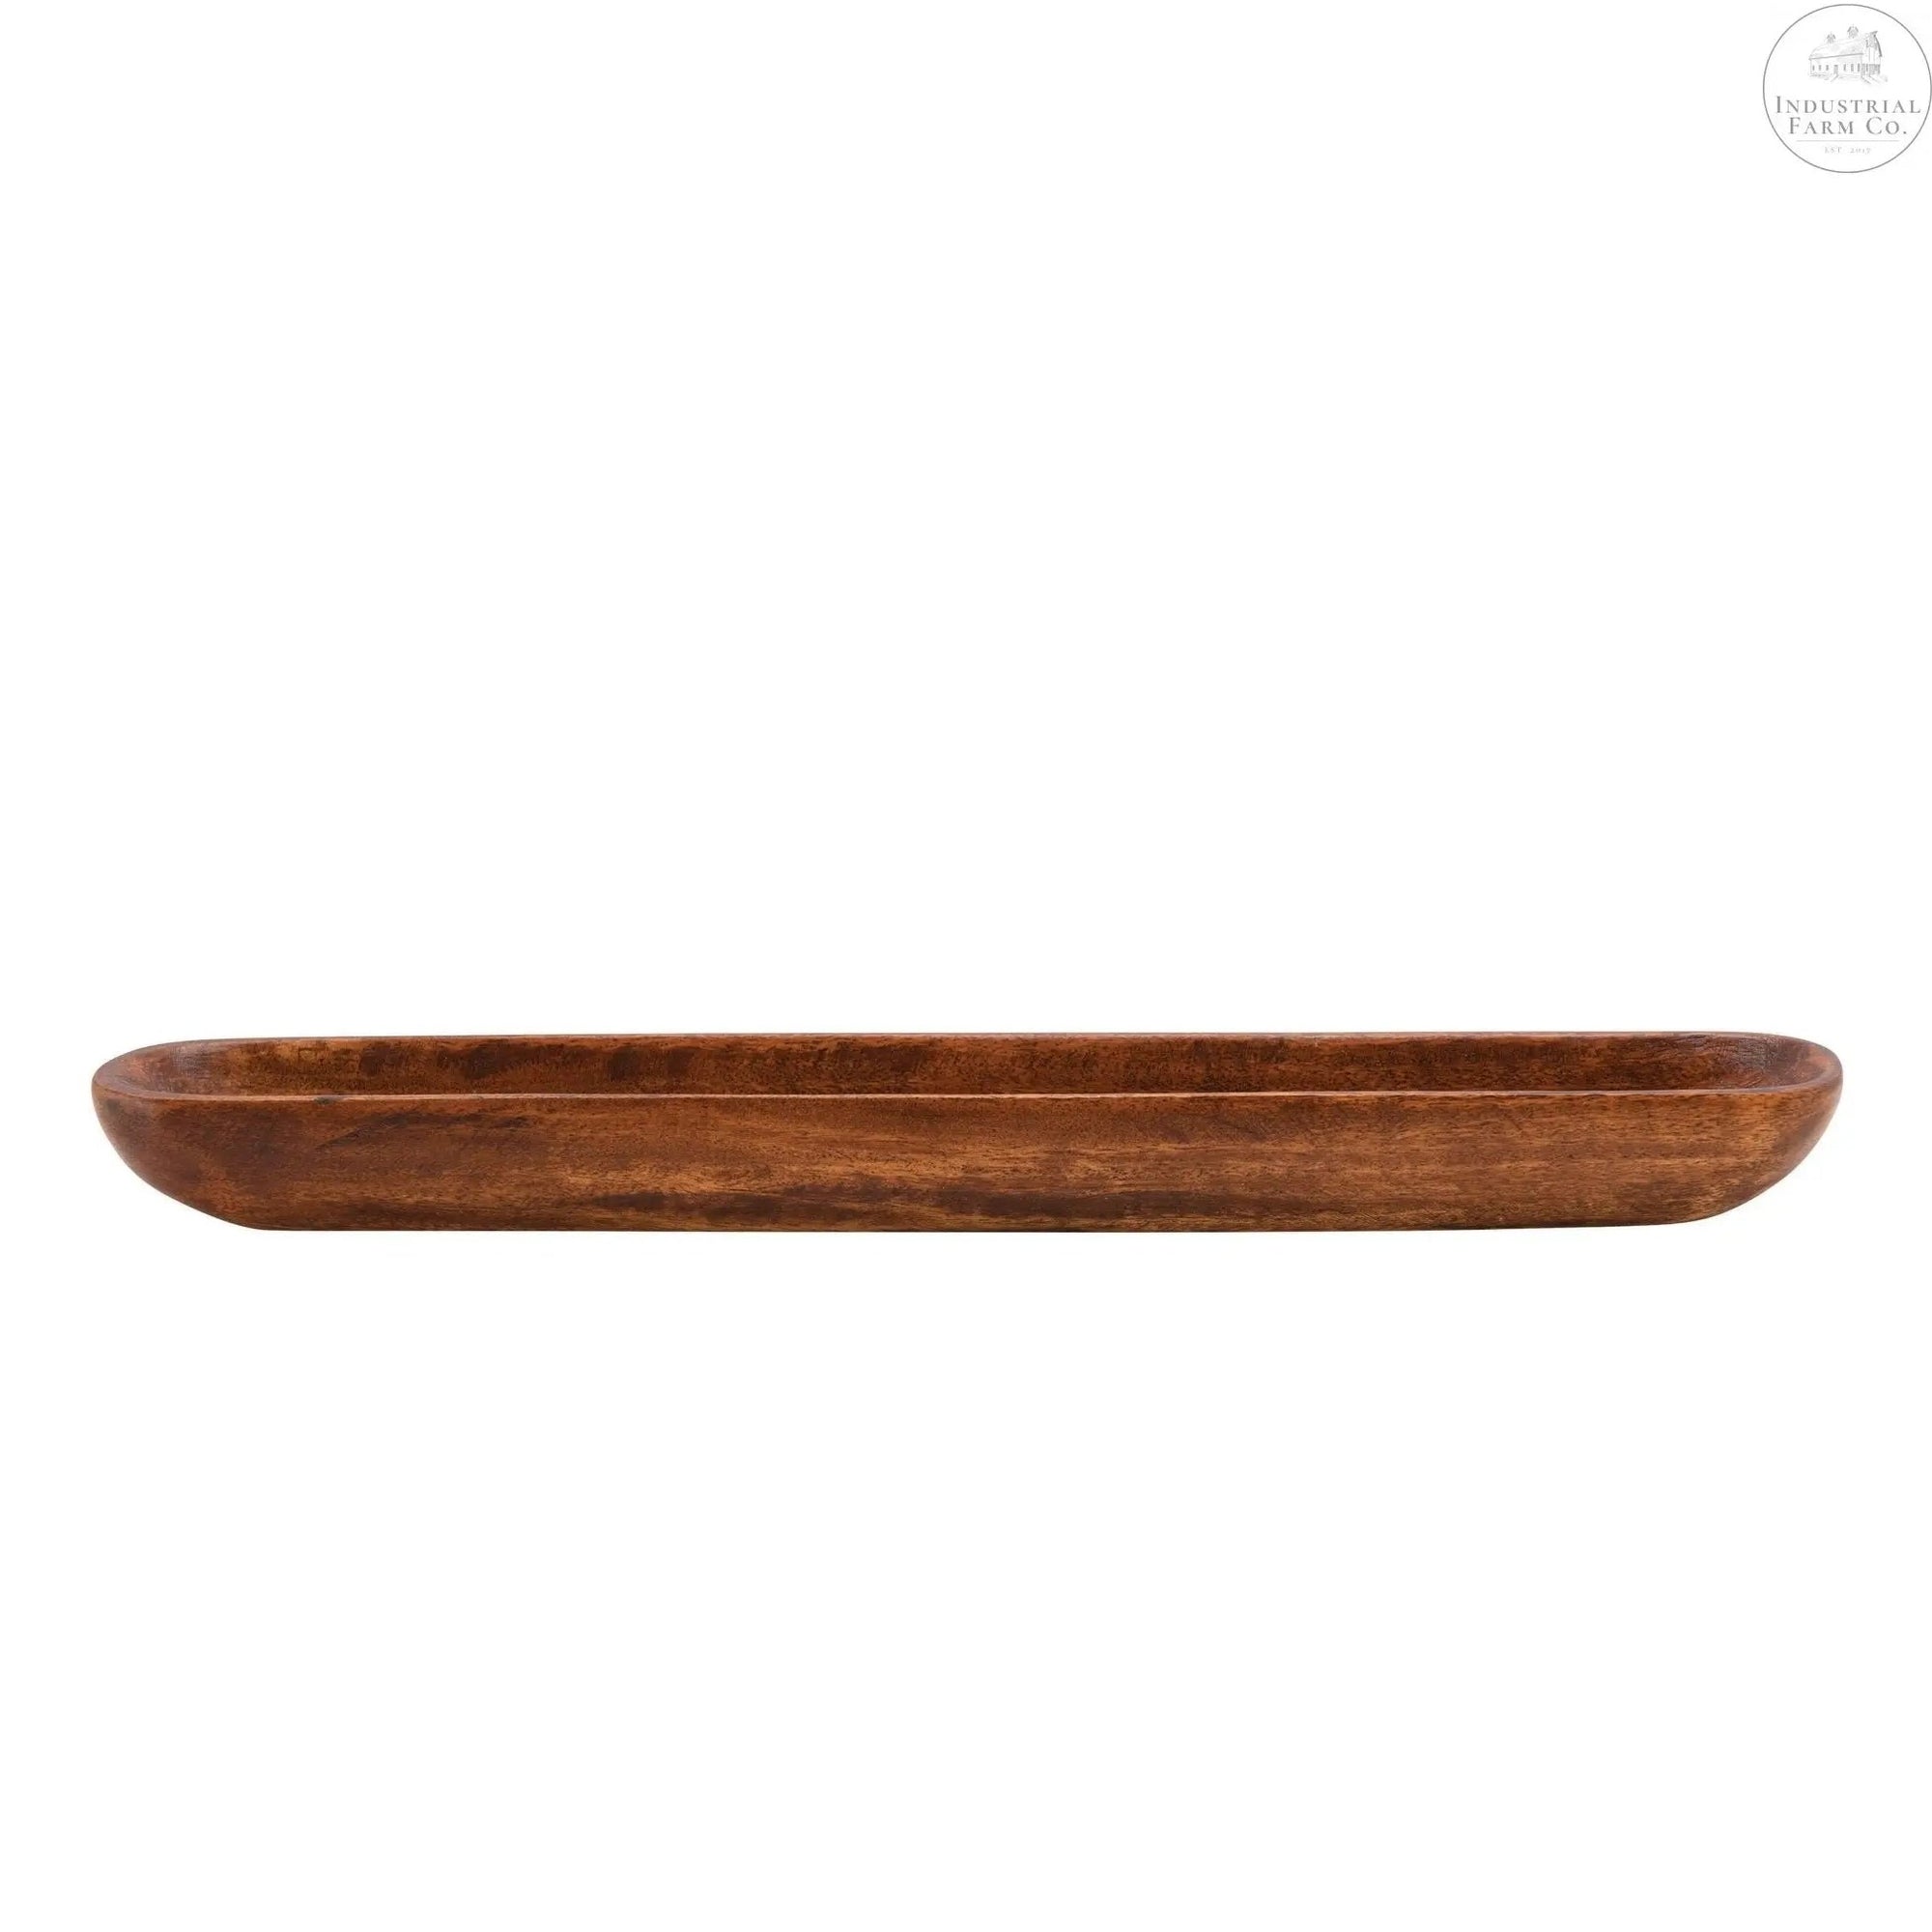 Acacia Wood Olive Boat  Default Title   | Industrial Farm Co